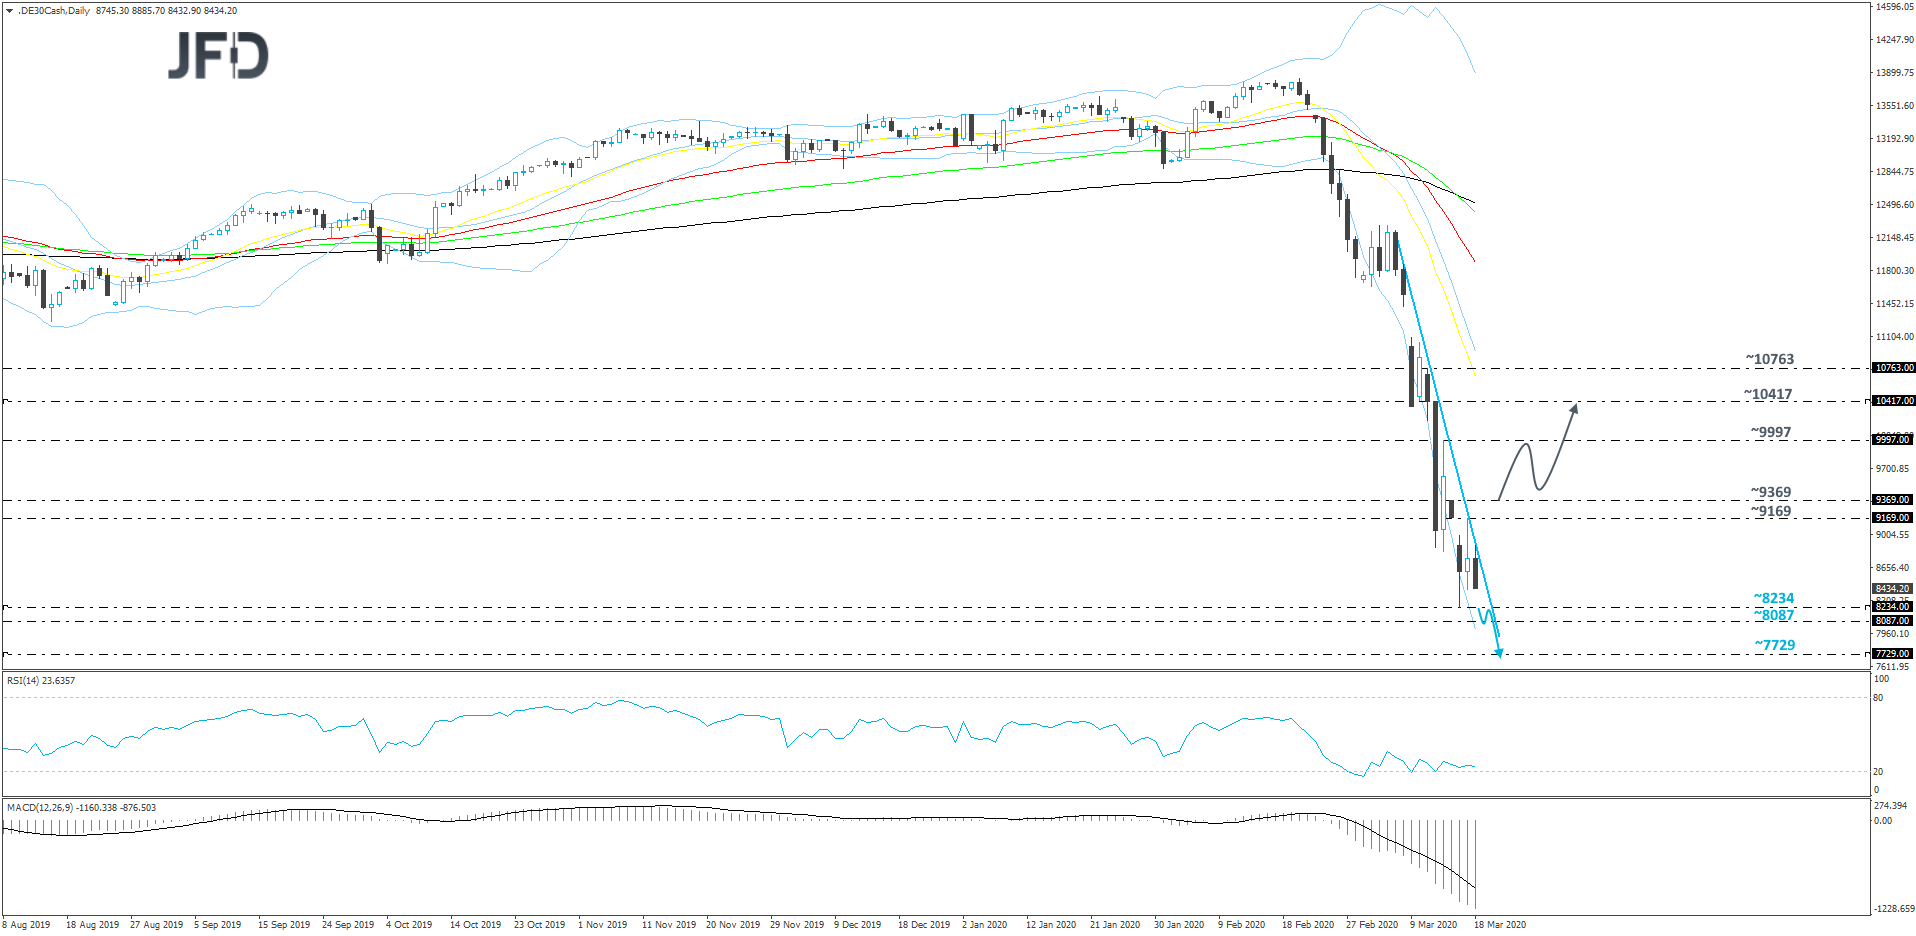 DAX cash index daily chart technical analysis